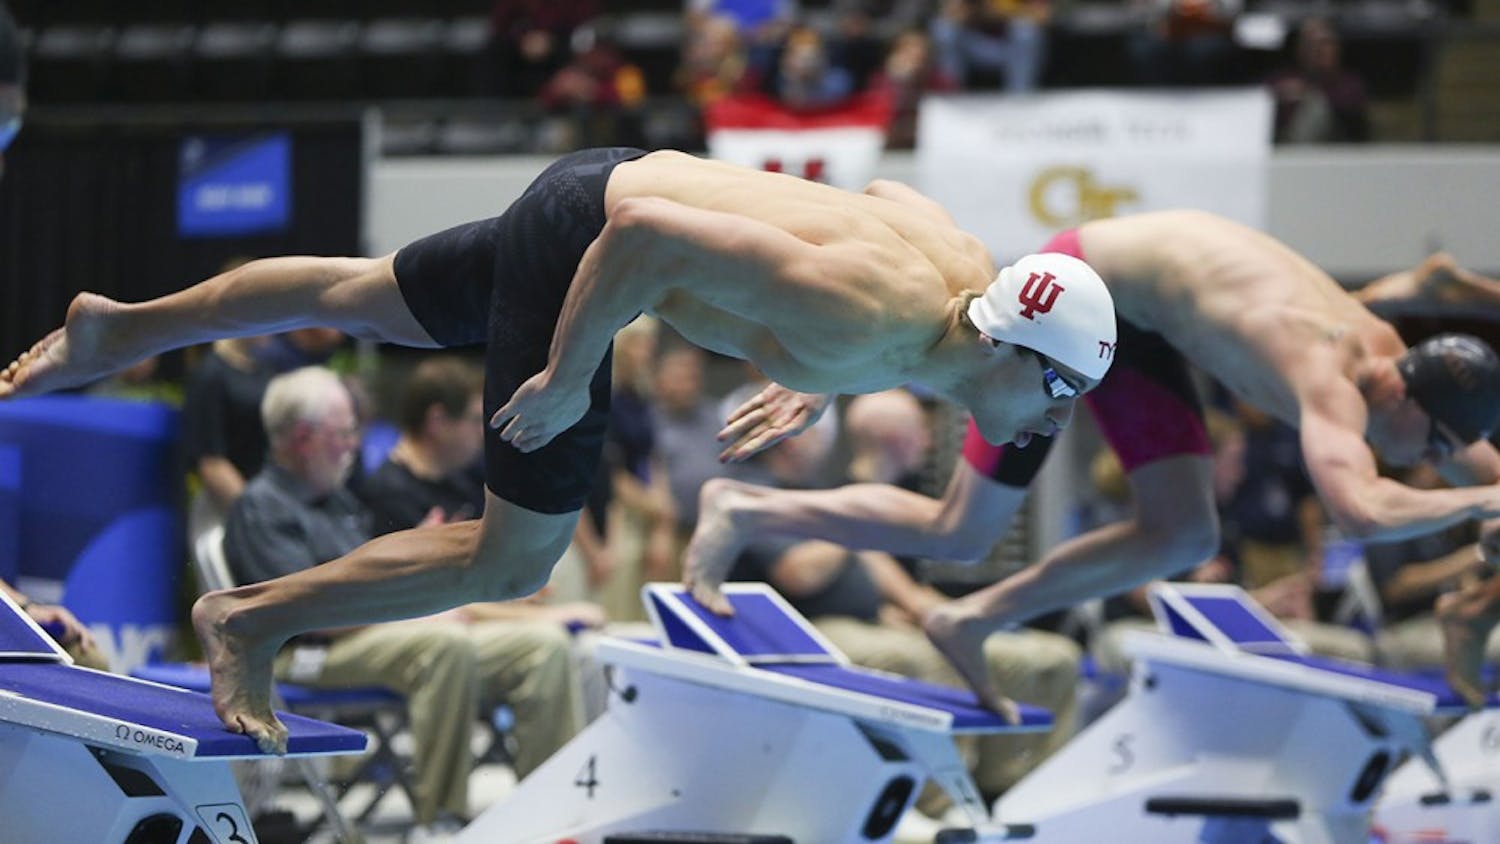 Blake Pieroni finished 2nd in the 200 meter freestyle at the Phillips 66 US Swimming Nationals on Wednesday at the IU Natatorium. Pieroni's time of 1:46.30 is a new school record and earned him a spot on the 4x200 freestyle relay for Team USA.